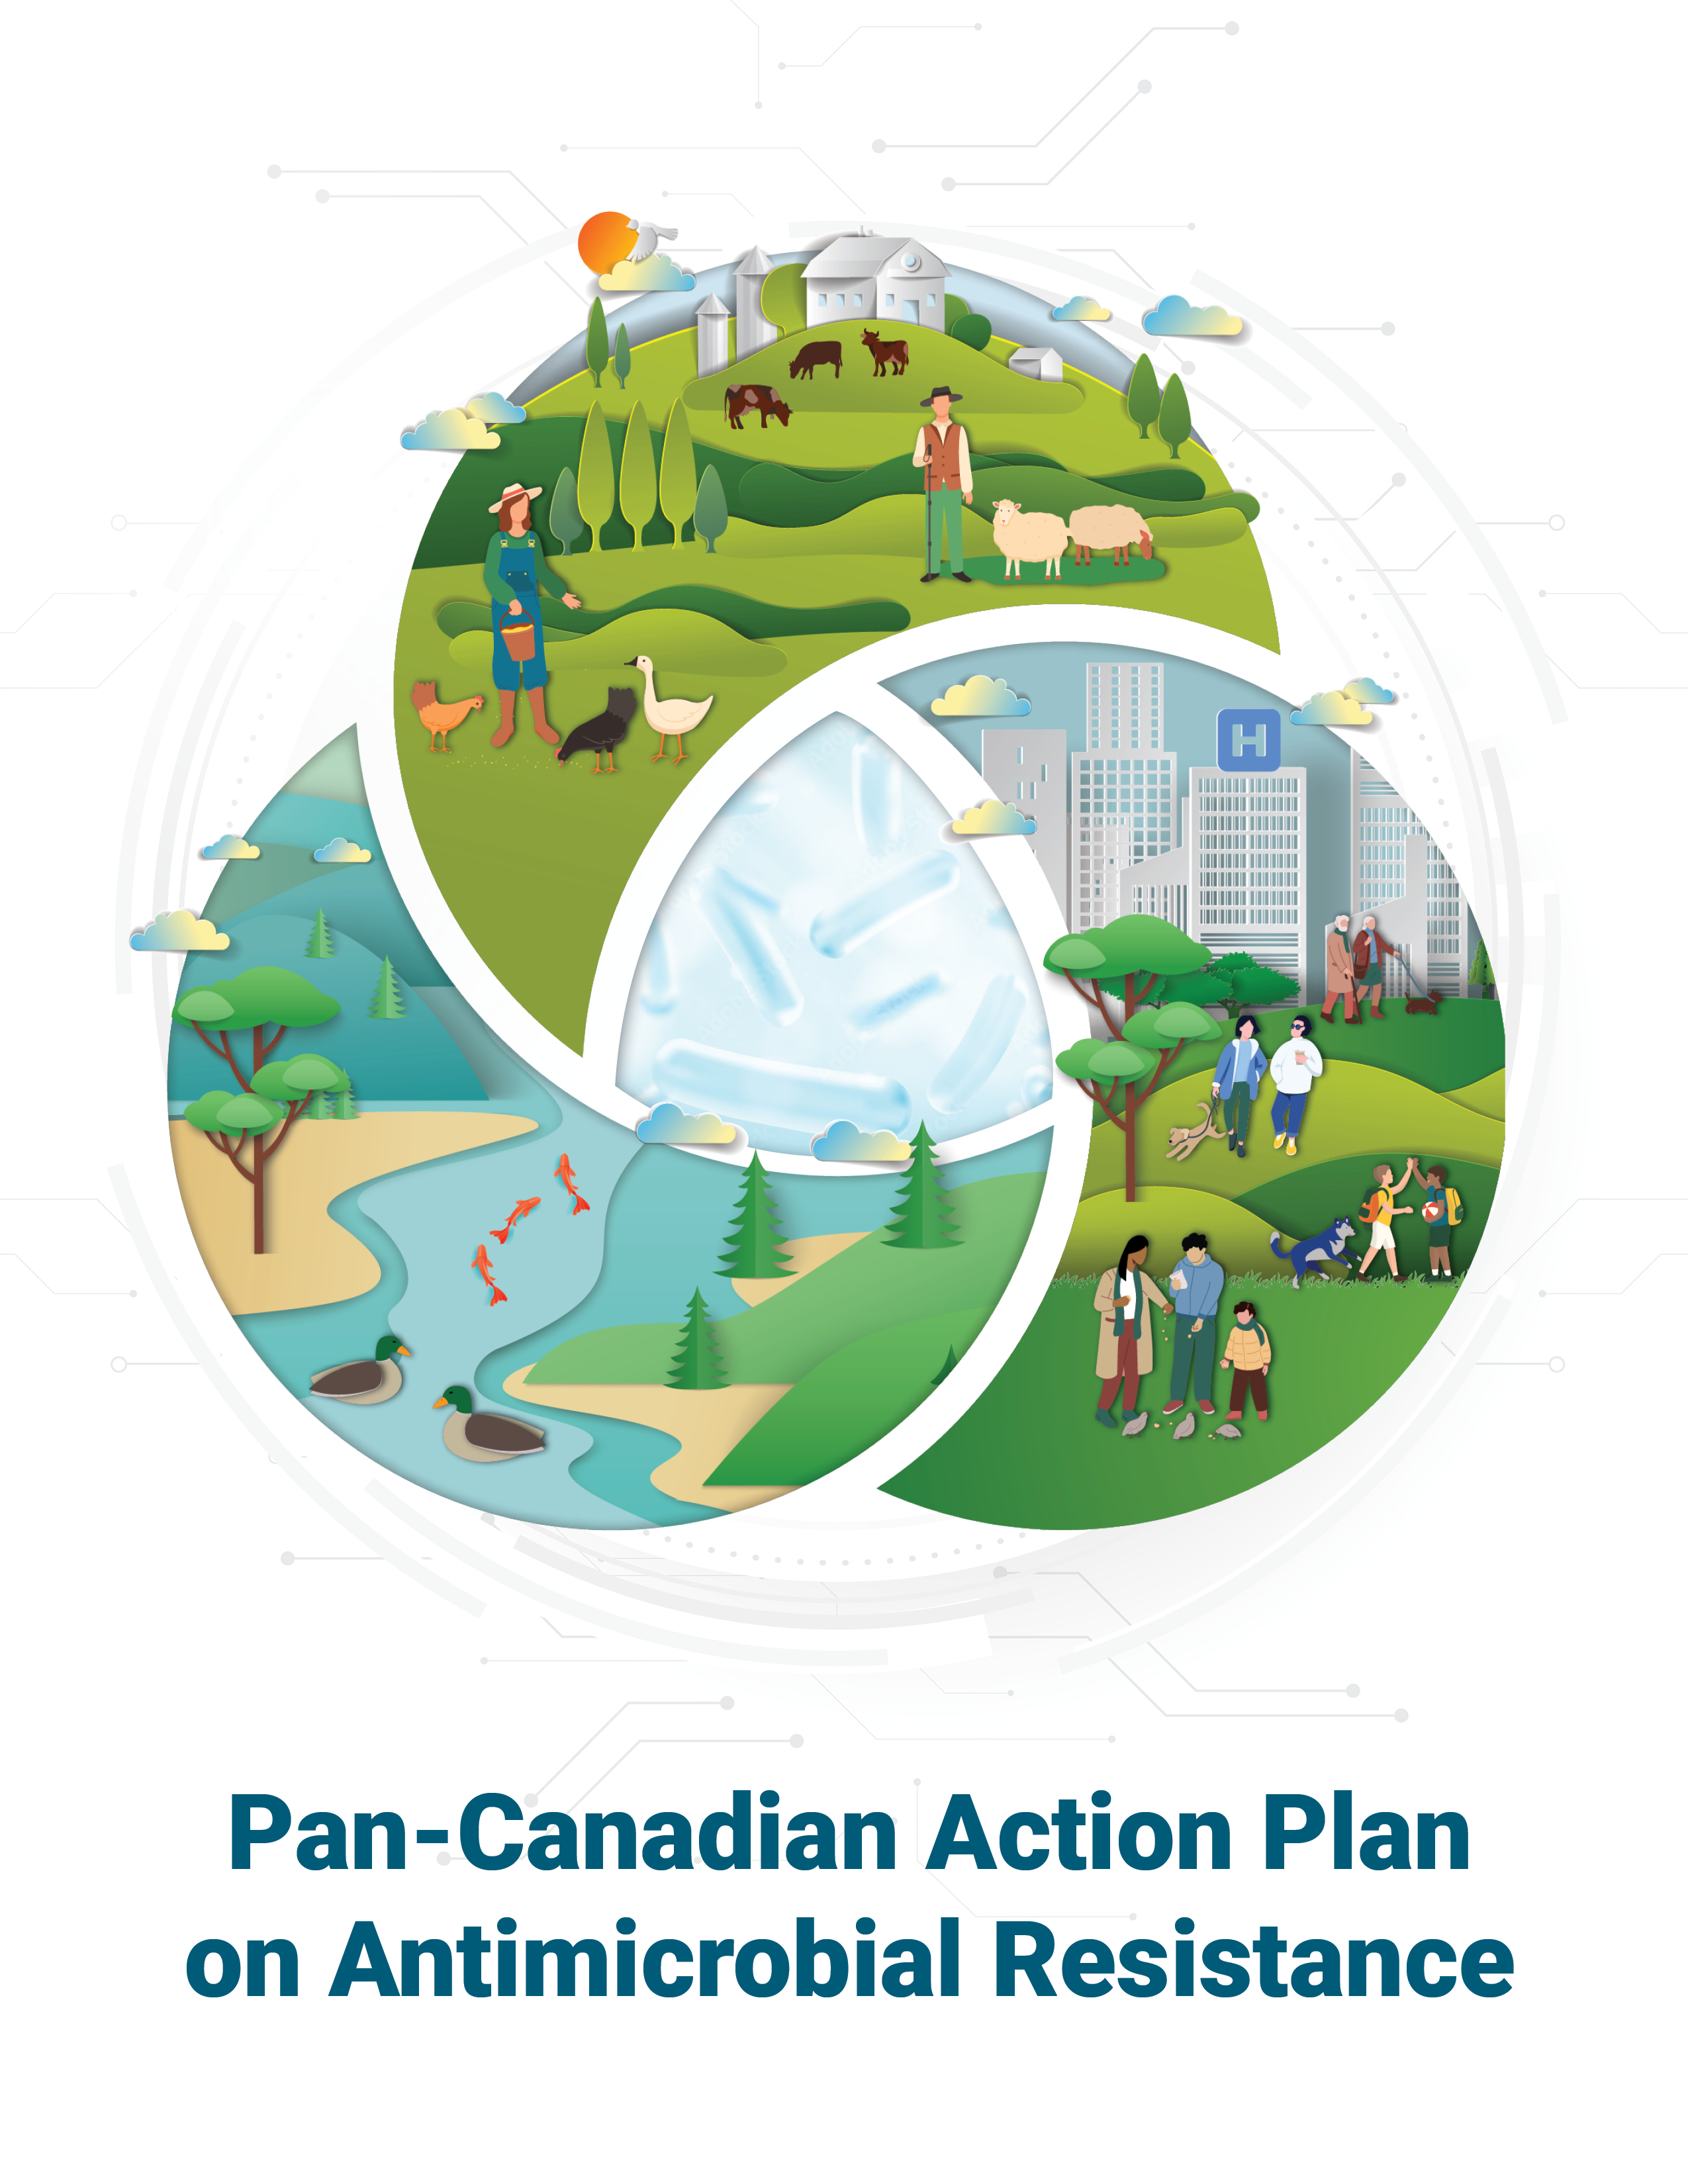 Pan-Canadian National Action Plan on AMR